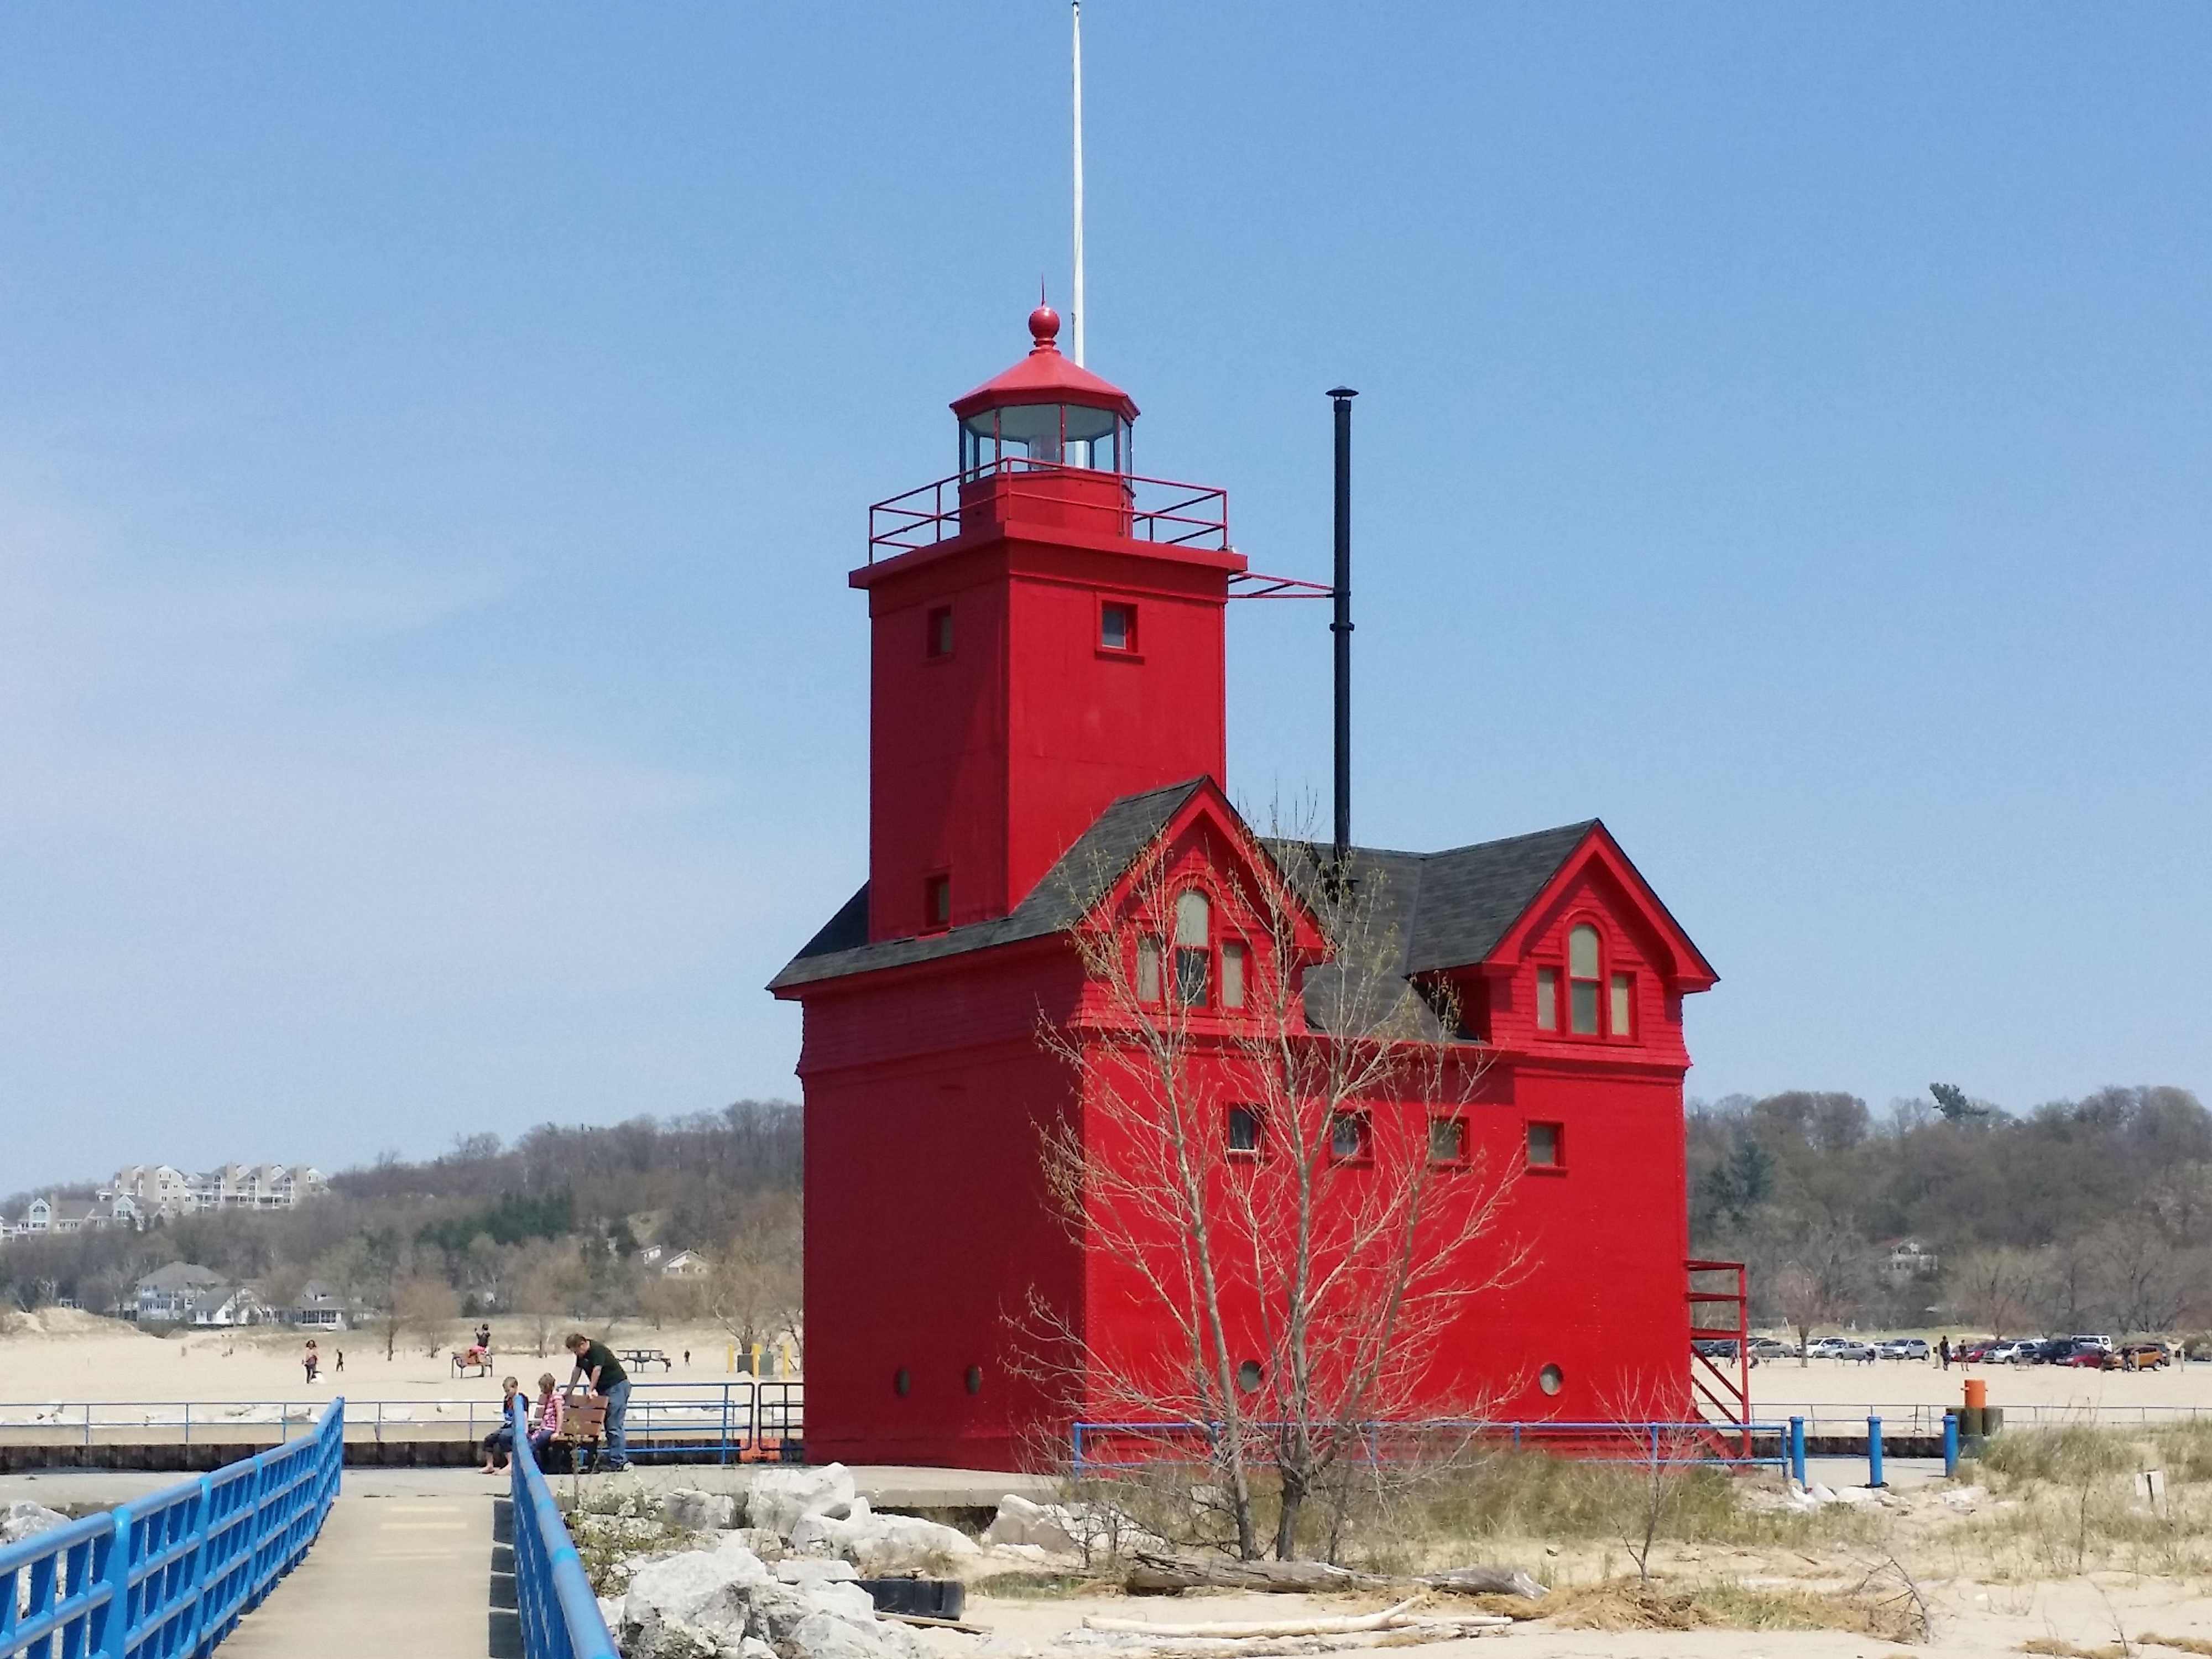 Just 7 miles away, Holland's famous "Big Red" is a must see